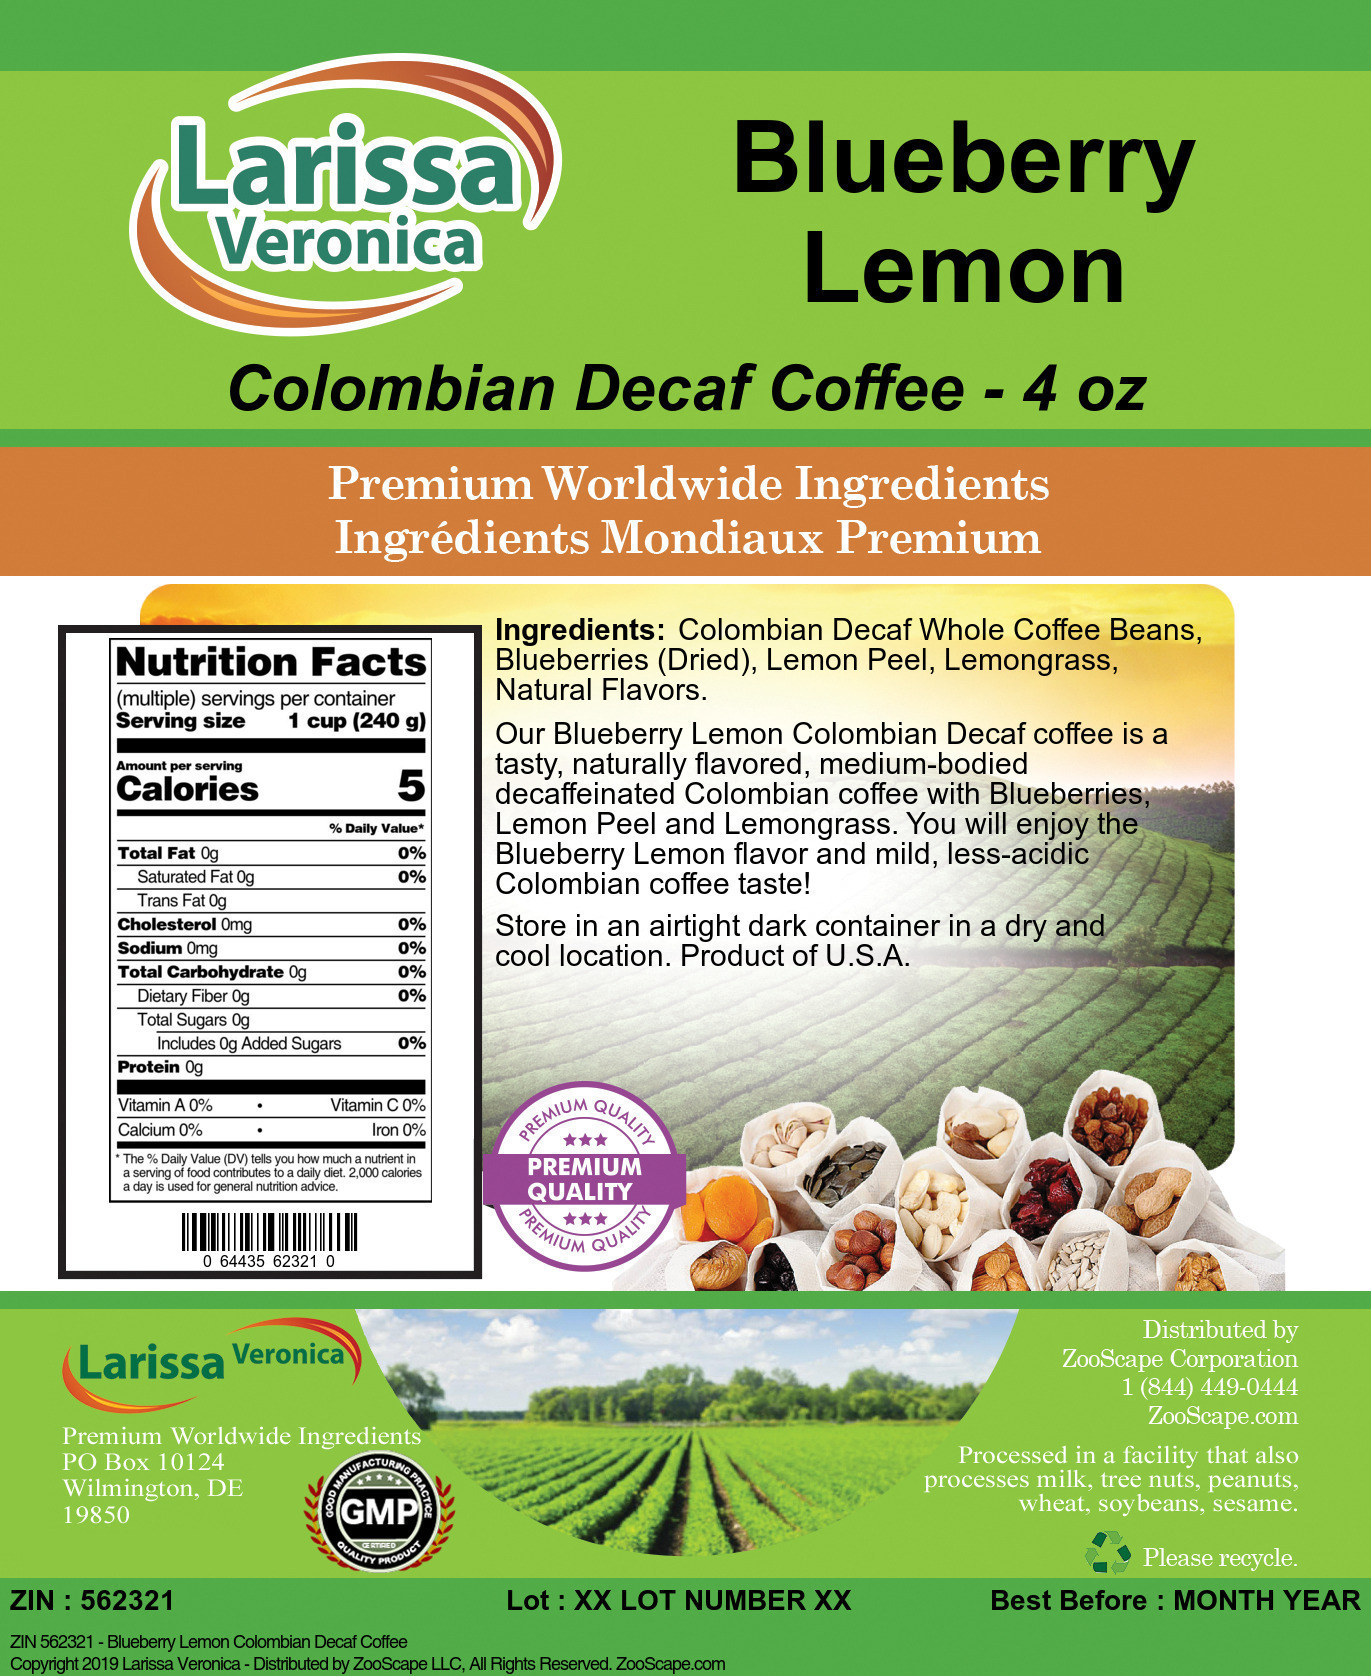 Blueberry Lemon Colombian Decaf Coffee - Label